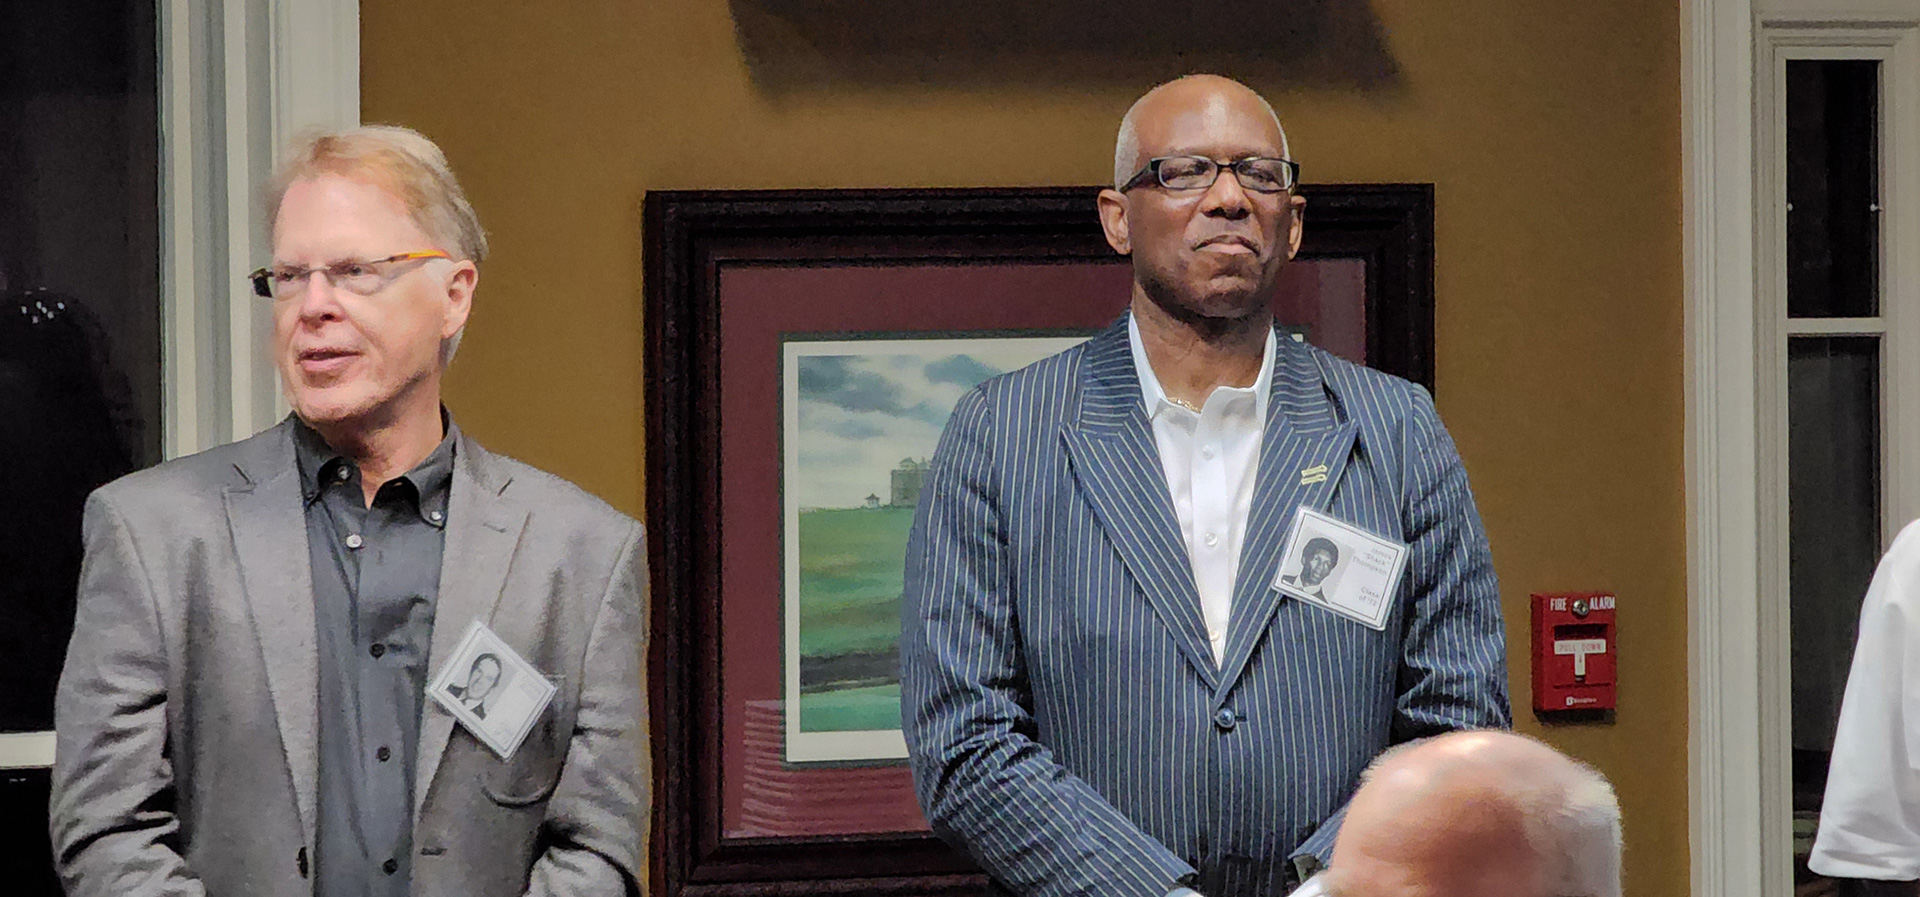 Charles McNair and James "Shack" Thompson at the Dothan High Class of 1972 reunion. (Photo by Dennis Lathem)